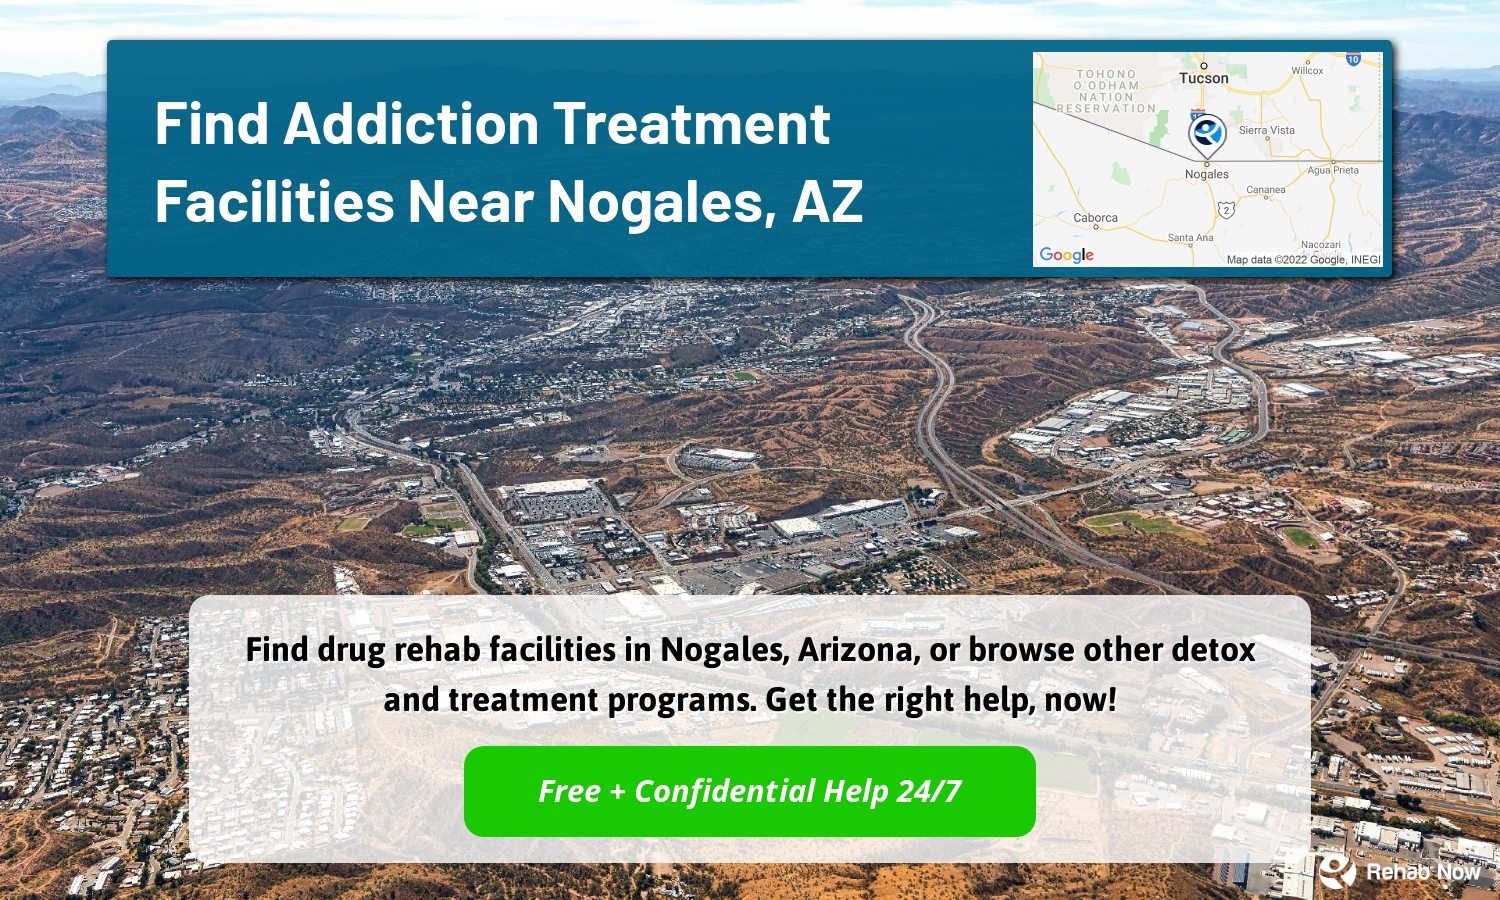 Find drug rehab facilities in Nogales, Arizona, or browse other detox and treatment programs. Get the right help, now!